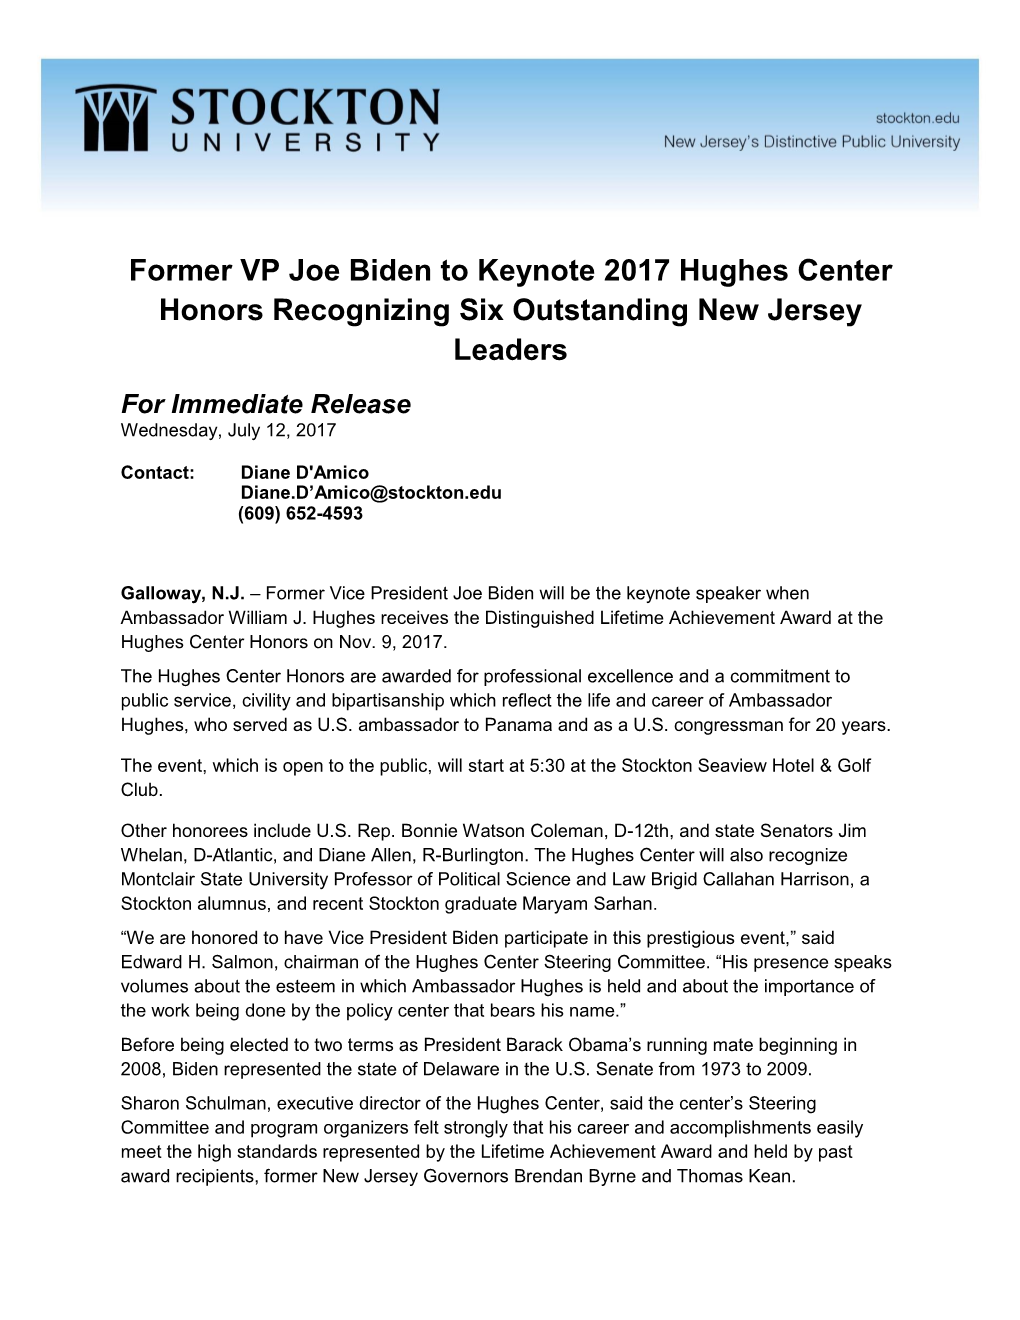 Former VP Joe Biden to Keynote 2017 Hughes Center Honors Recognizing Six Outstanding New Jersey Leaders for Immediate Release Wednesday, July 12, 2017